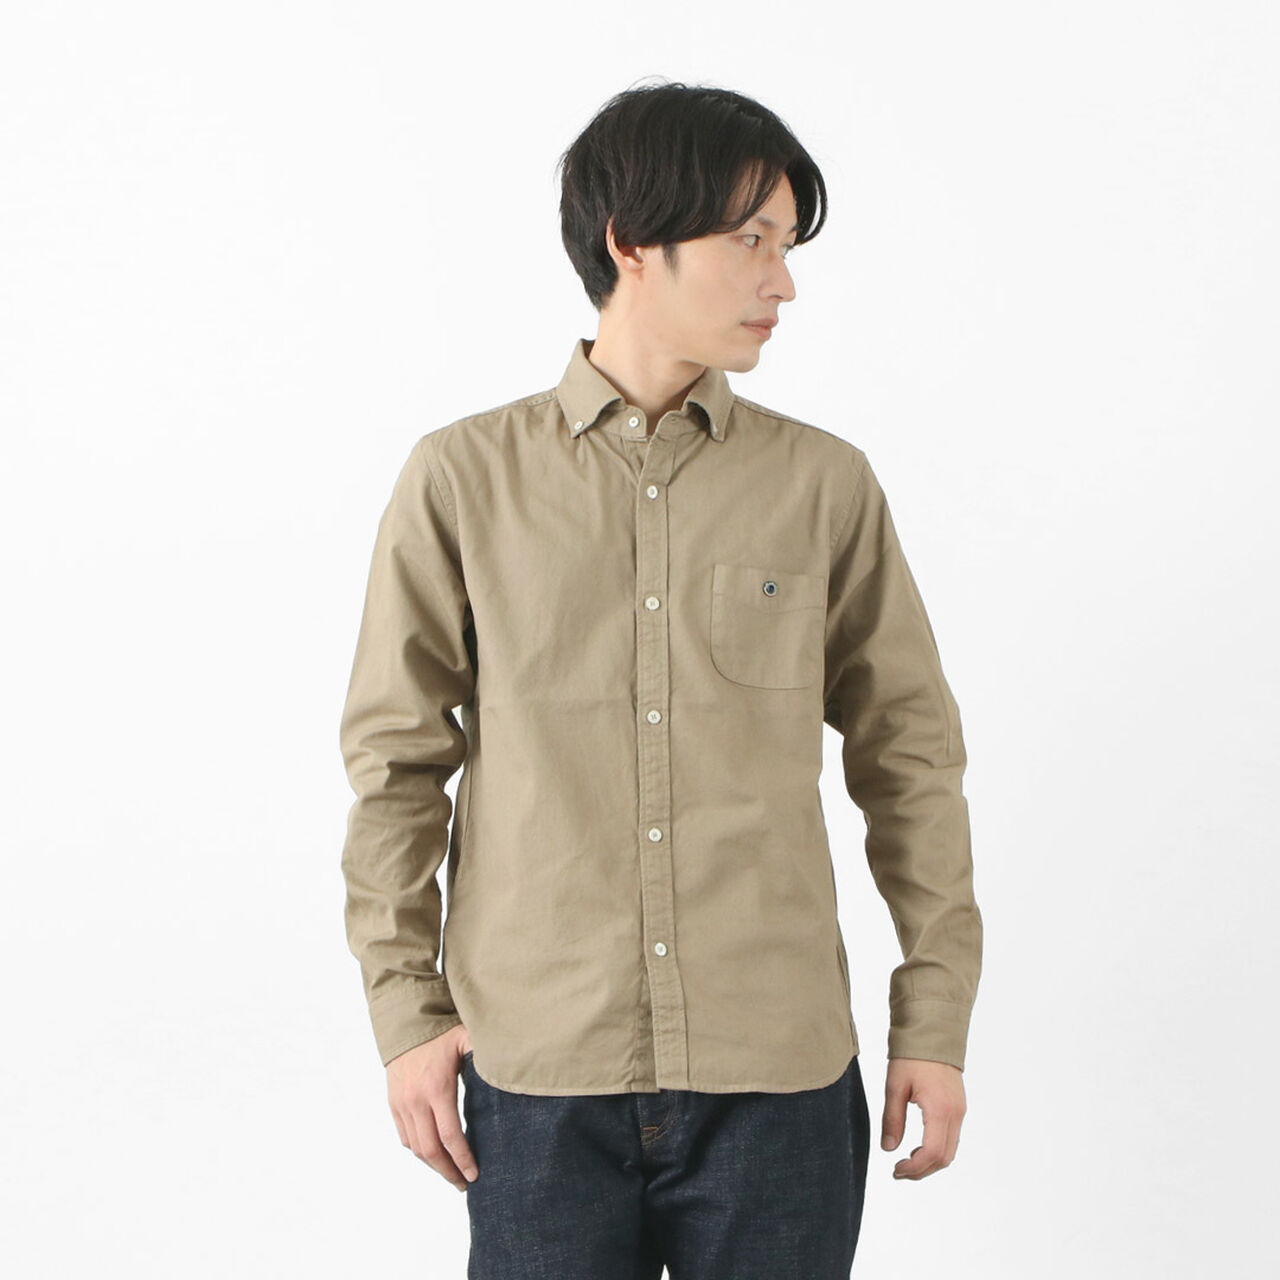 Colour Special Order Ox Long Sleeve Button Down Shirt,Desert, large image number 0